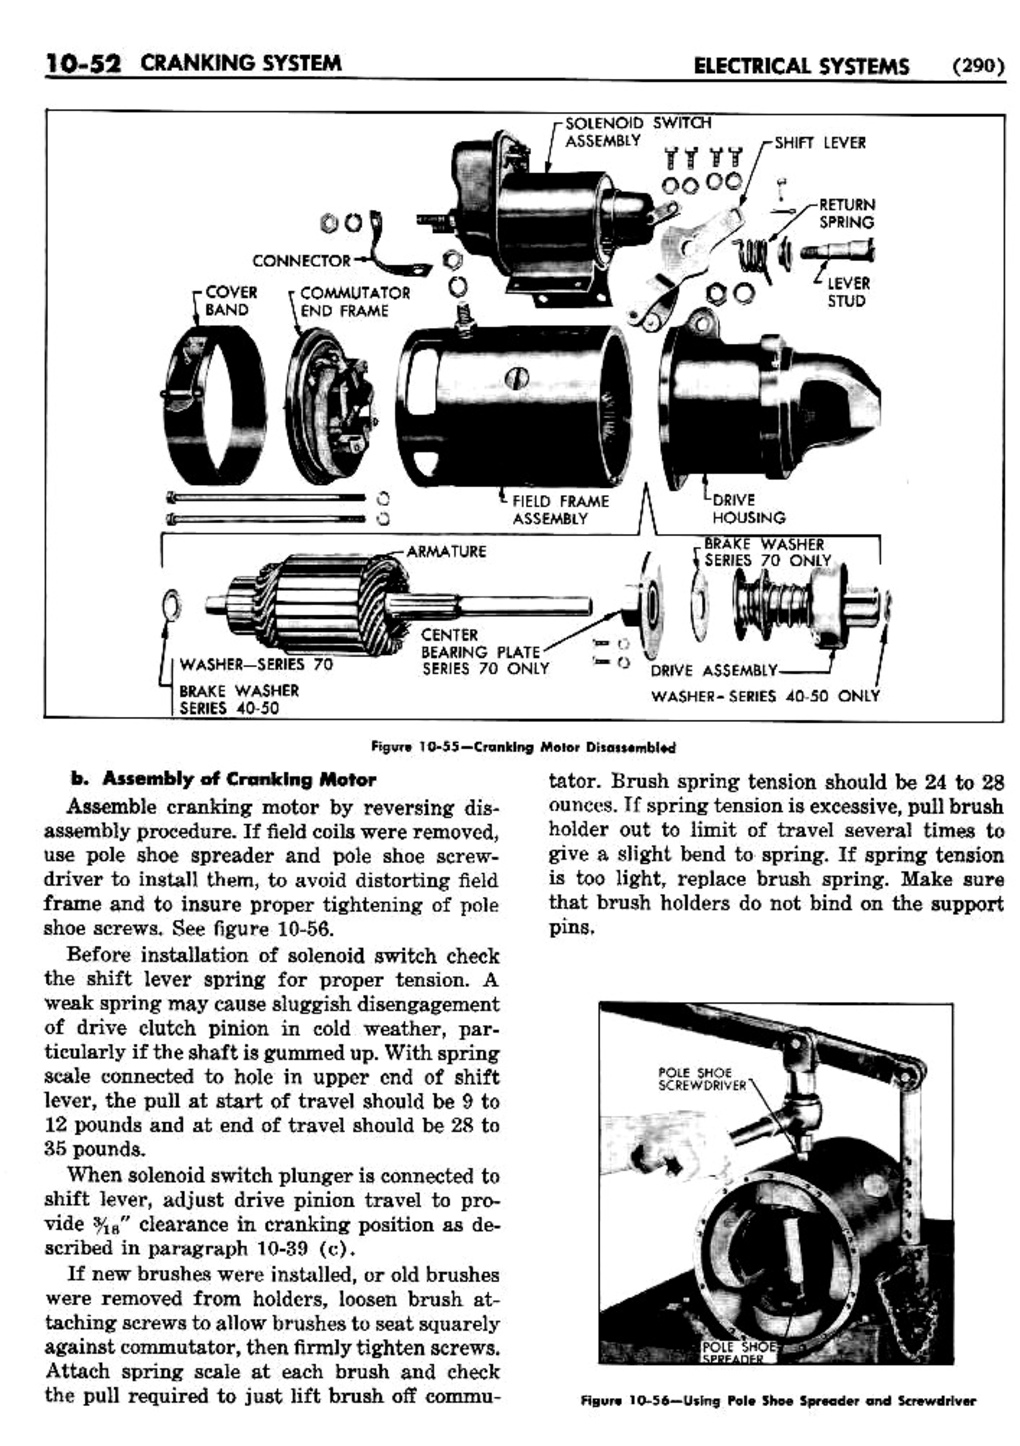 n_11 1950 Buick Shop Manual - Electrical Systems-052-052.jpg